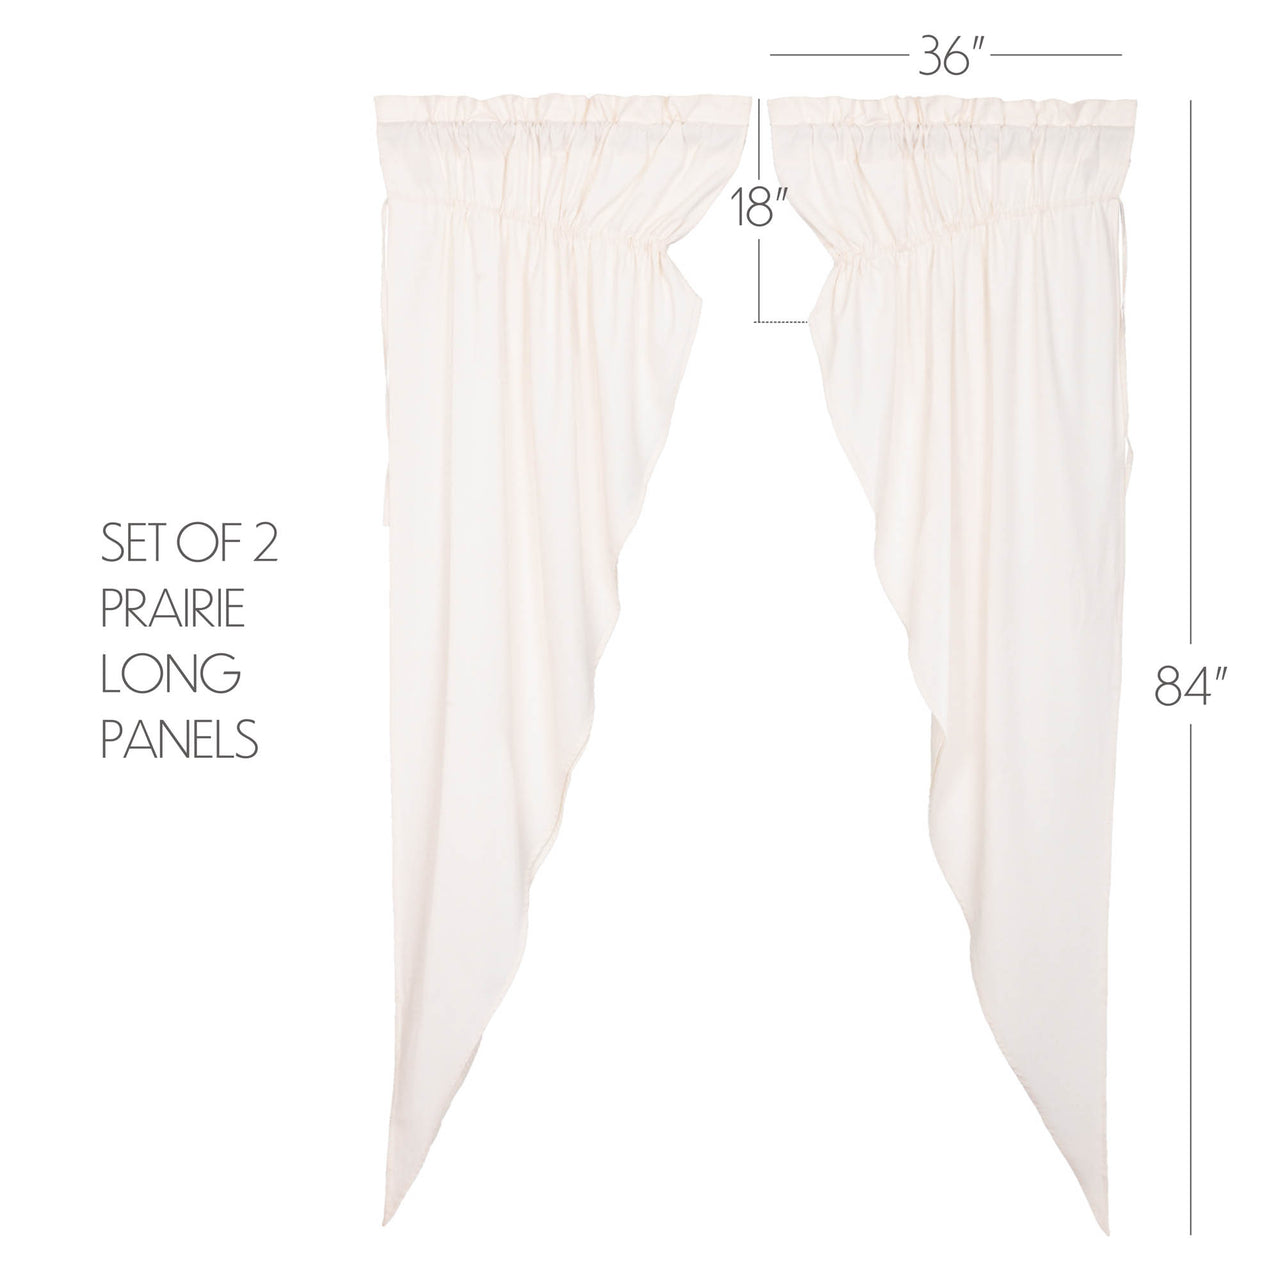 Simple Life Flax Antique White Prairie Long Panel Curtain Set of 2 84x36x18 VHC Brands